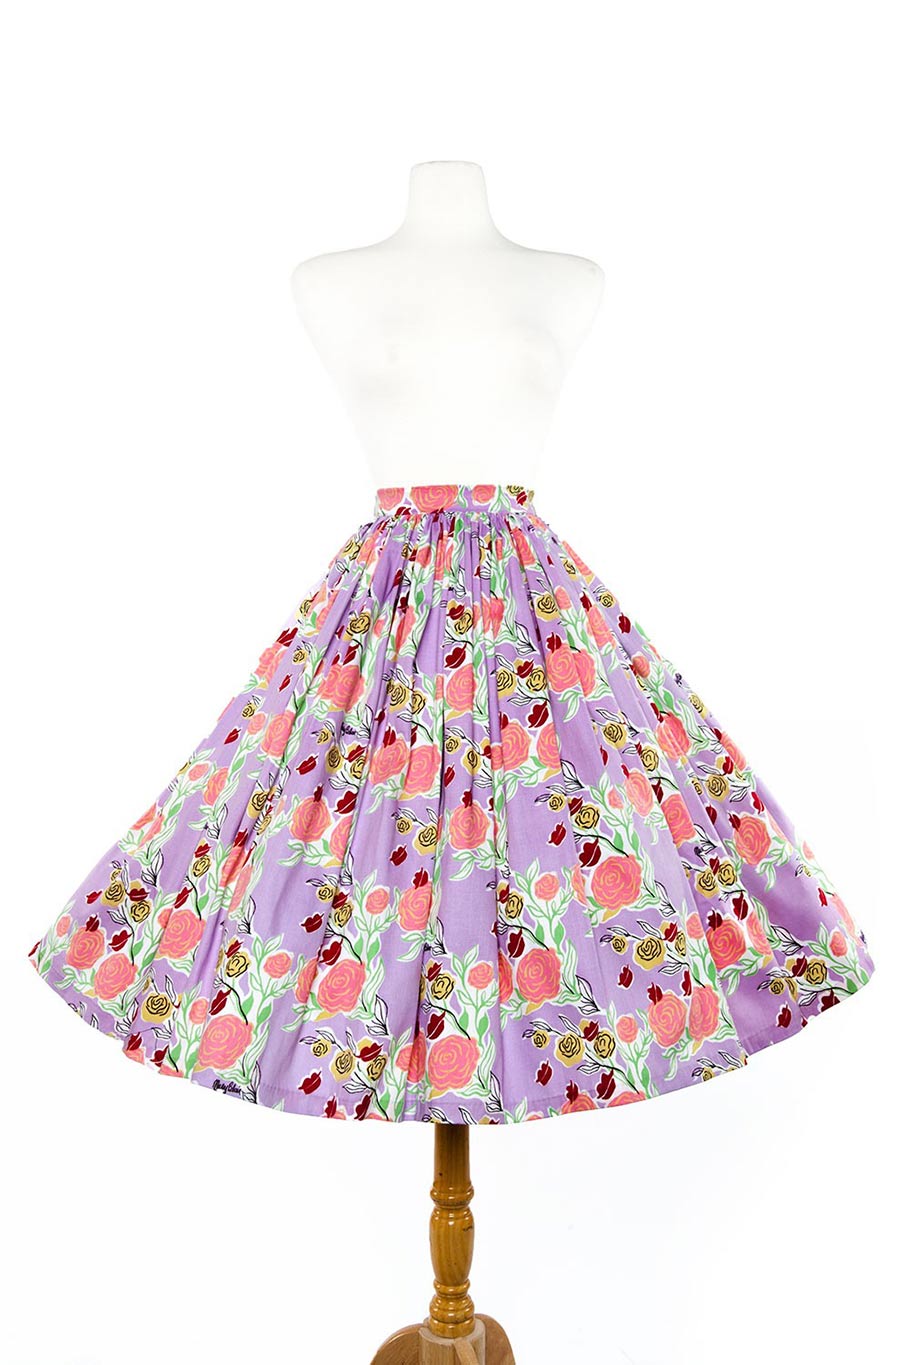 Jenny skirt in lips and roses print in lavender. (Click to enlarge.)